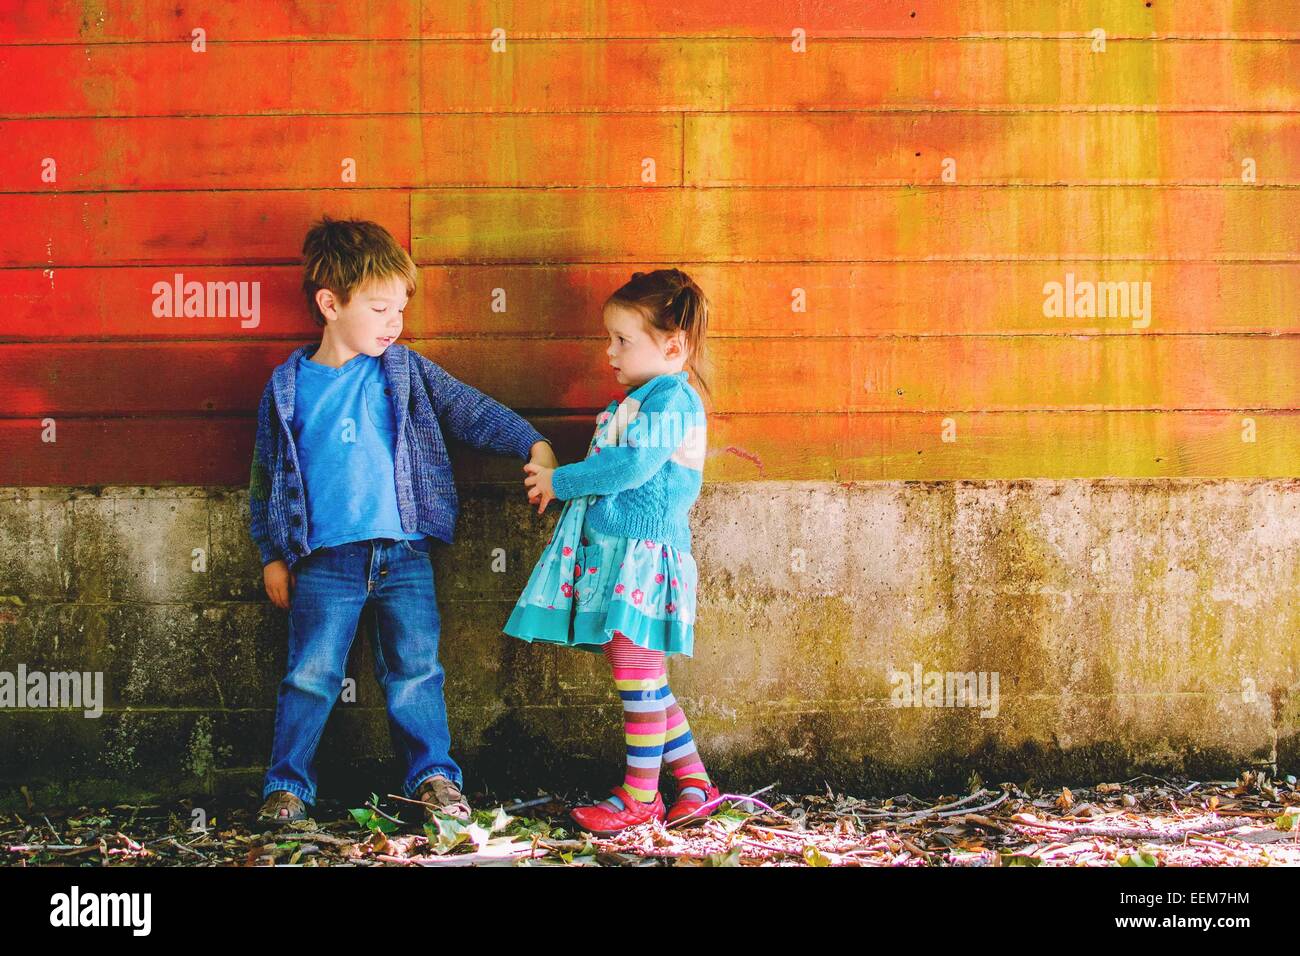 Boy and girl standing by a wall holding hands Stock Photo